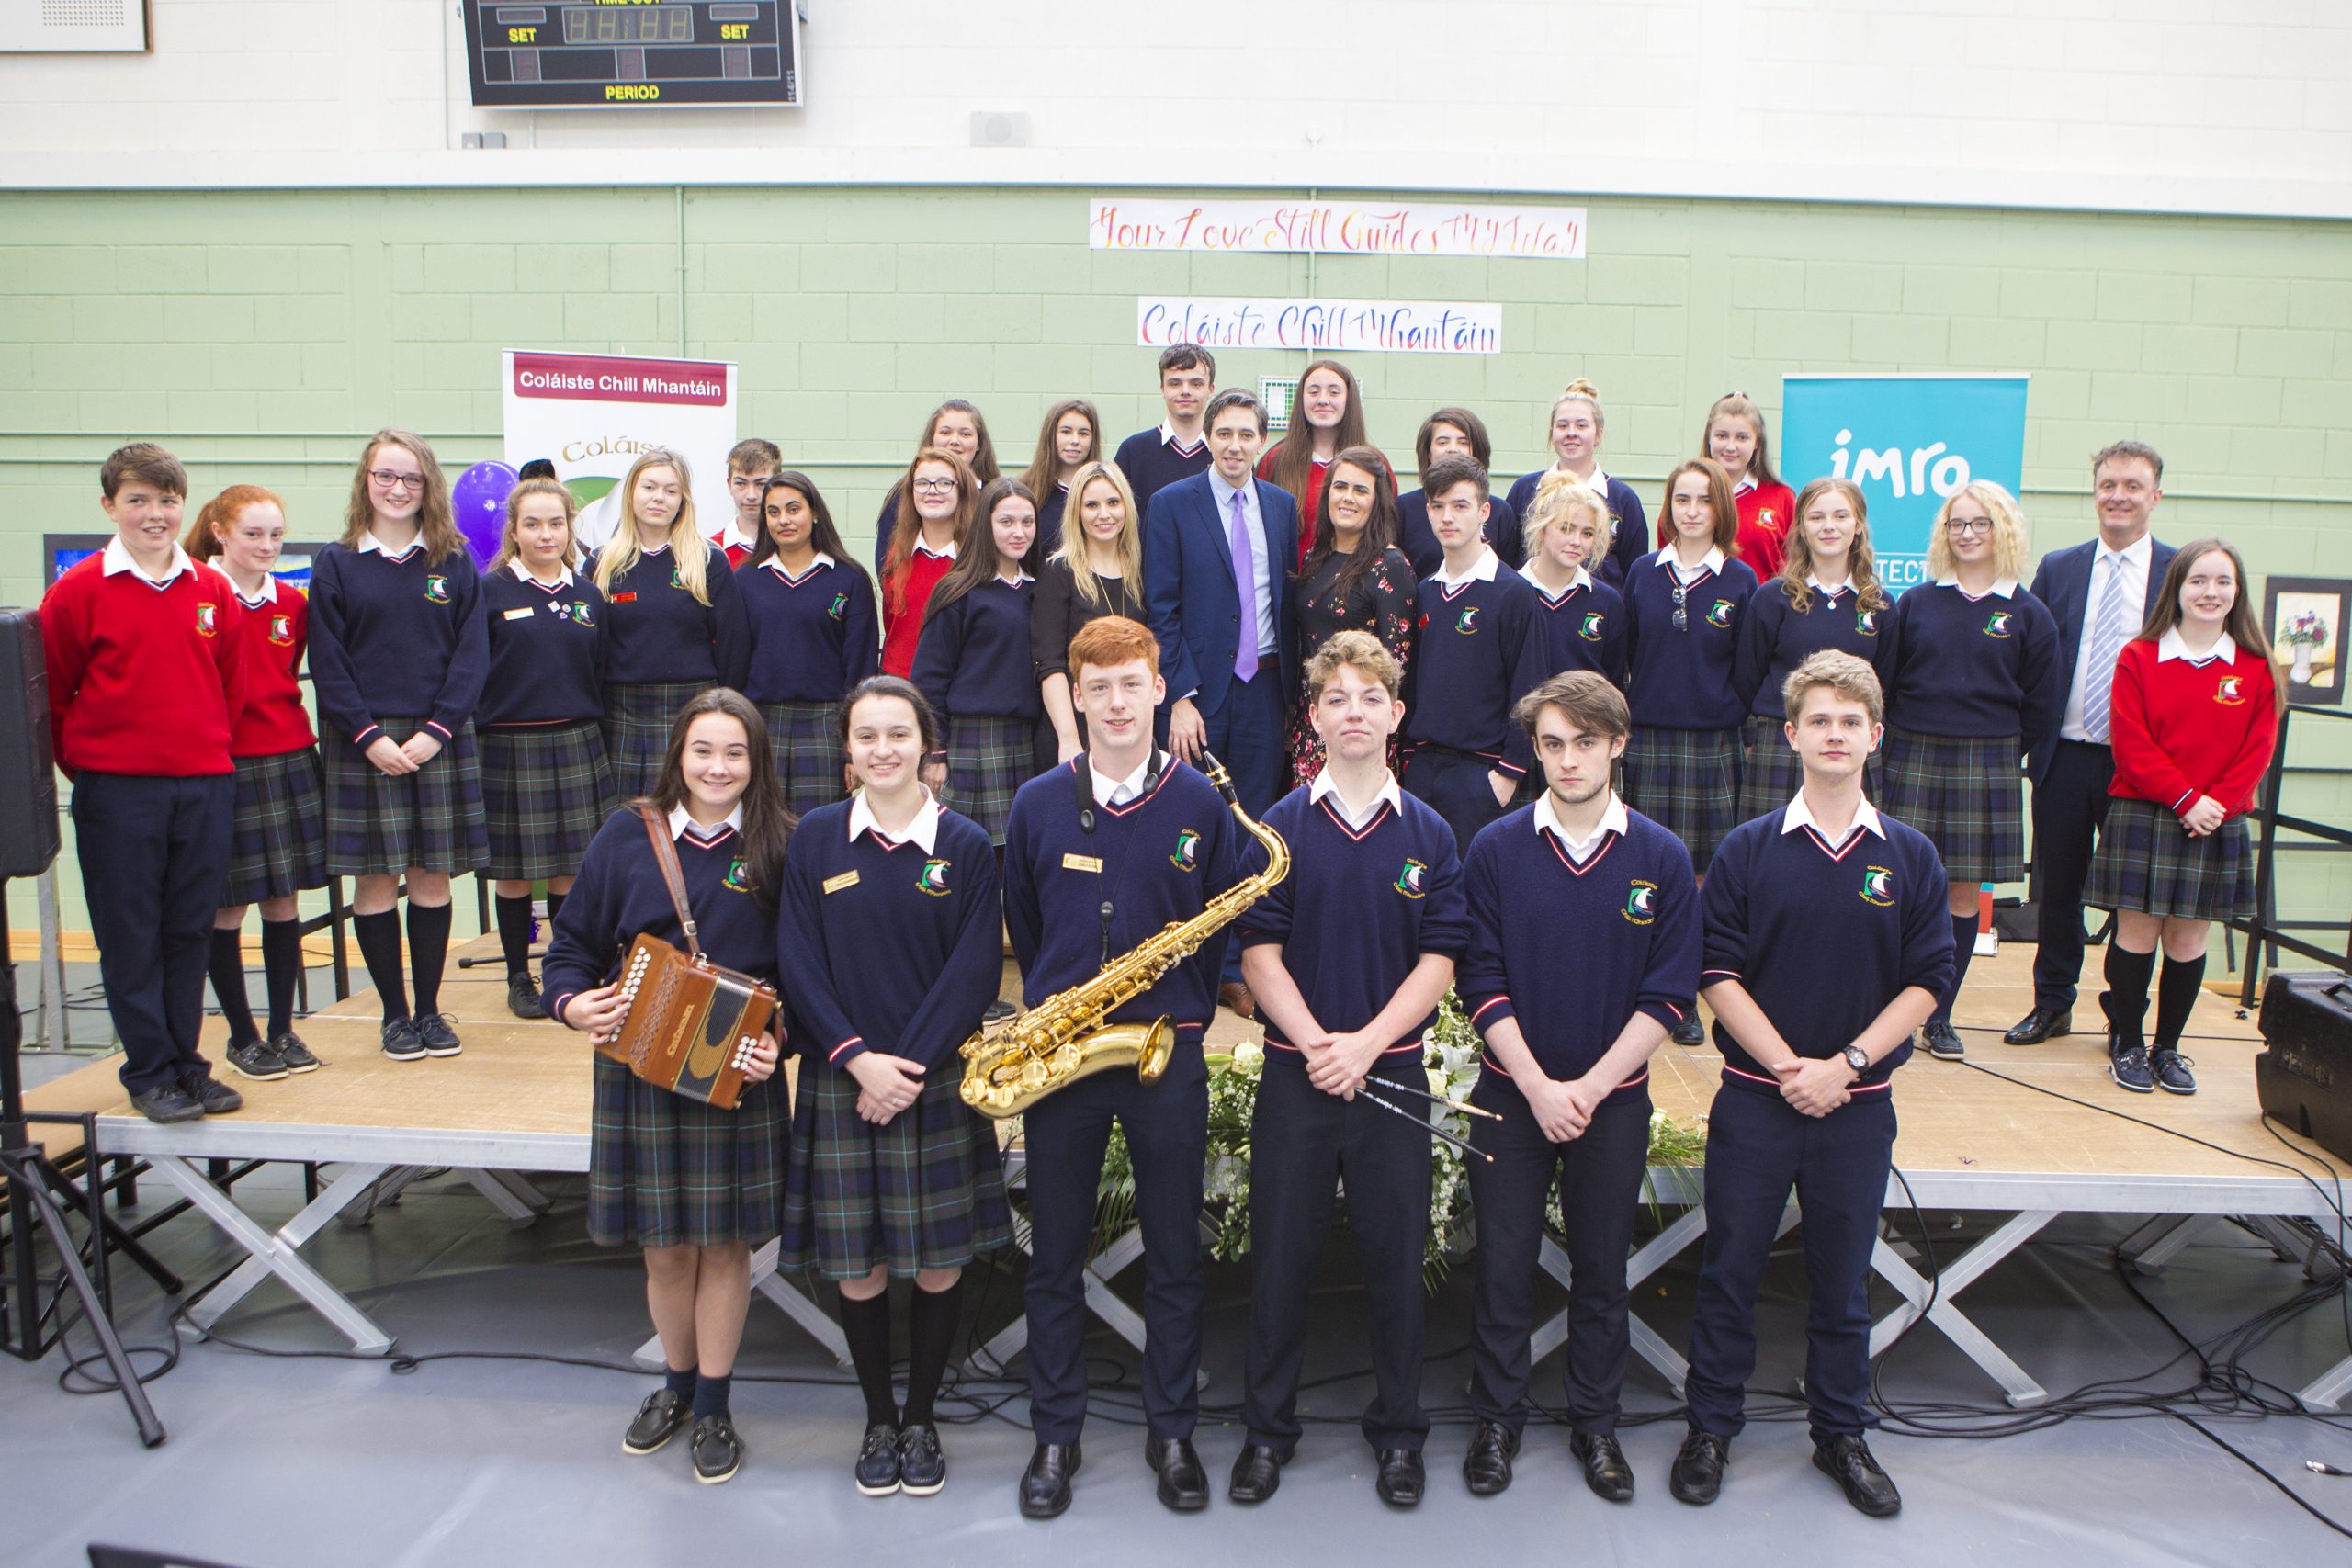 Minister, Simon Harris with Luan Parle and Teachers and students of Coláiste Chill Mhantáinat at the official lauch the single 'Your Love Still Guides My Way' by the students which reached number 1 in iTunes on the day with proceeds in aid of The Irish Heart Foundation and The Alzheimer Society of Ireland. The song was written during an IMRO songwriting workshop with Luan Parle. (Pic Michael Kelly)